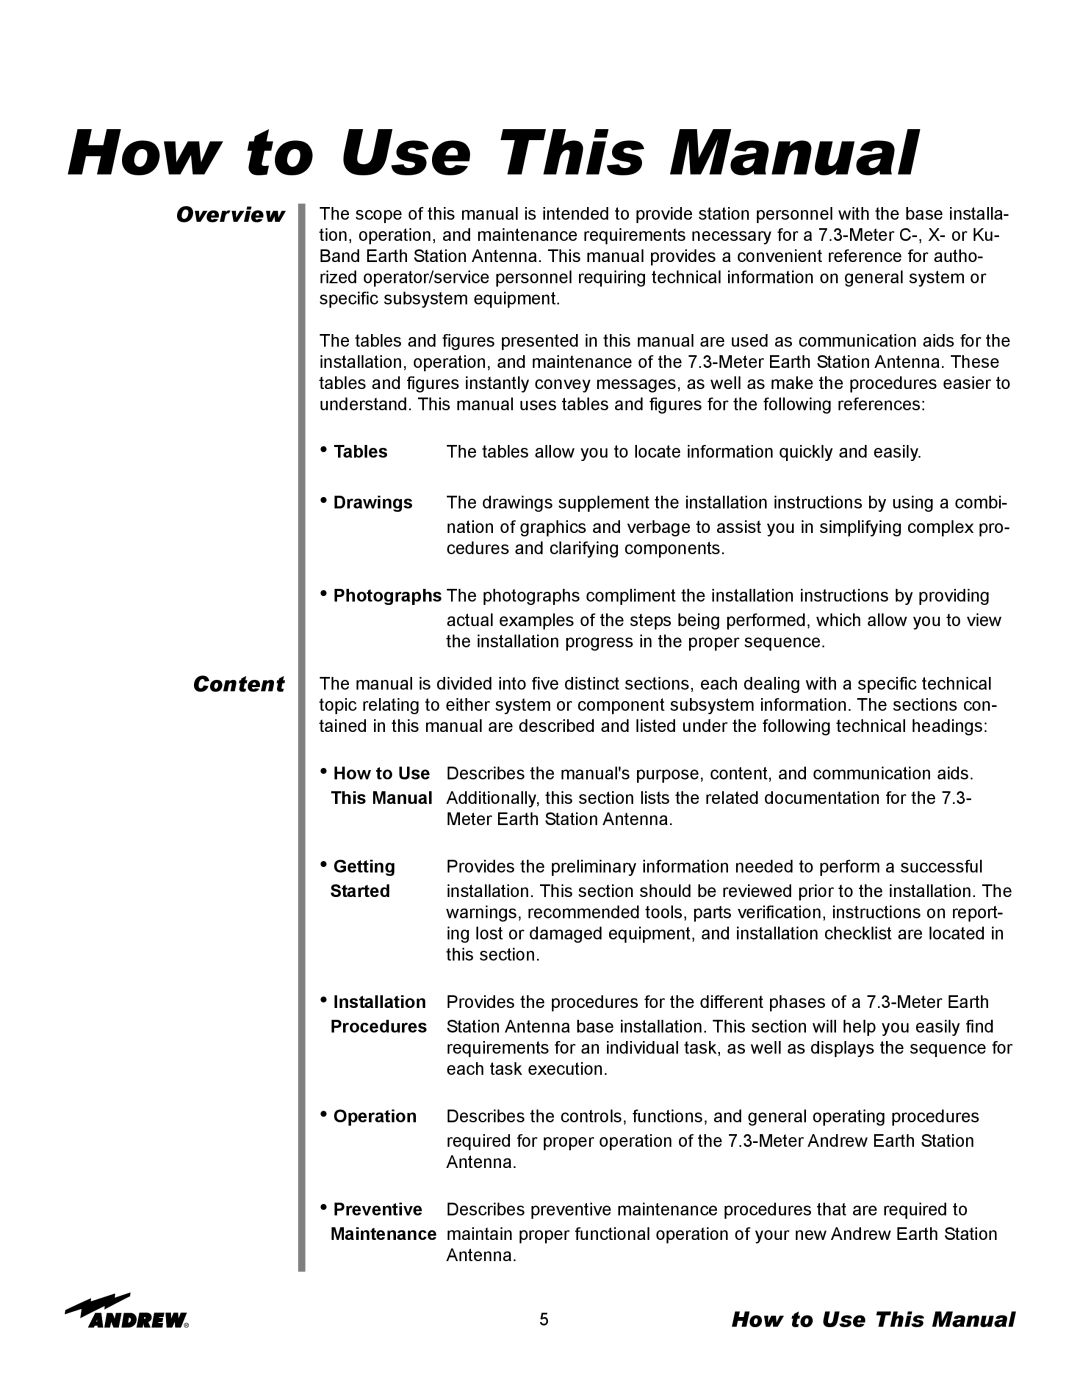 Andrew ES73 manual How to Use This Manual, Overview Content 